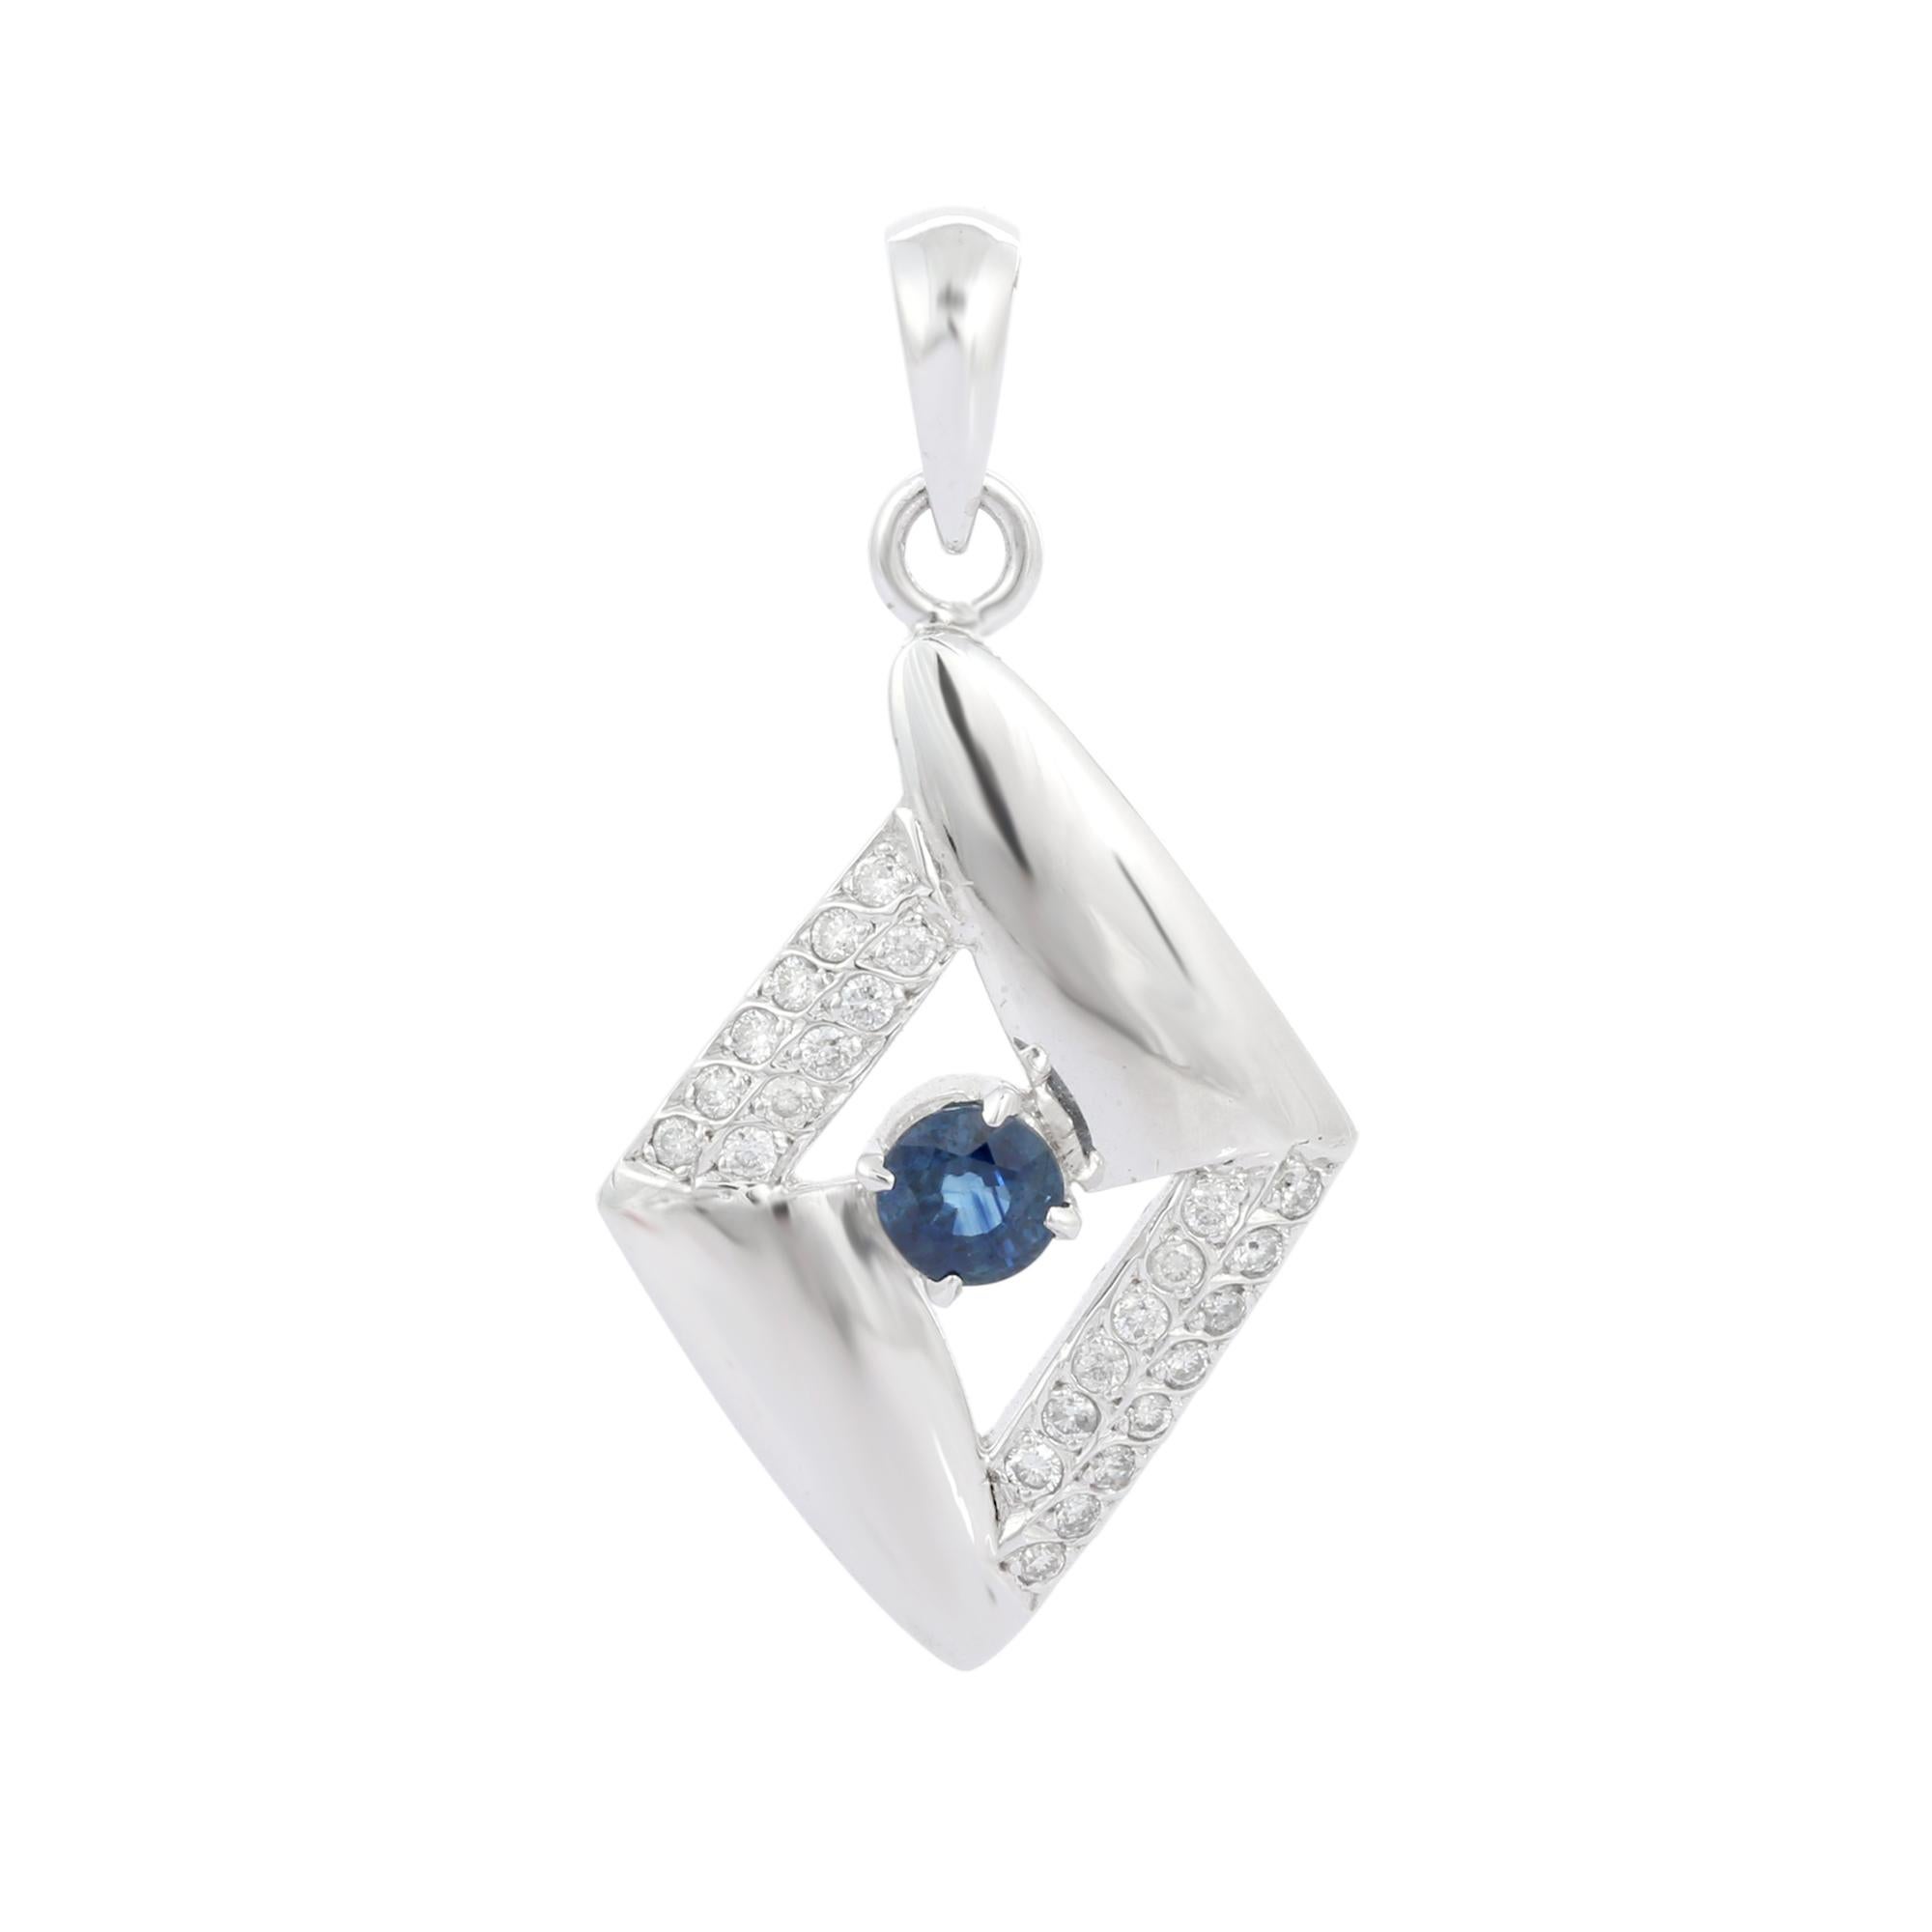 Natural Blue Sapphire pendant in 18K Gold. It has a round cut sapphire studded with diamonds that completes your look with a decent touch. Pendants are used to wear or gifted to represent love and promises. It's an attractive jewelry piece that goes